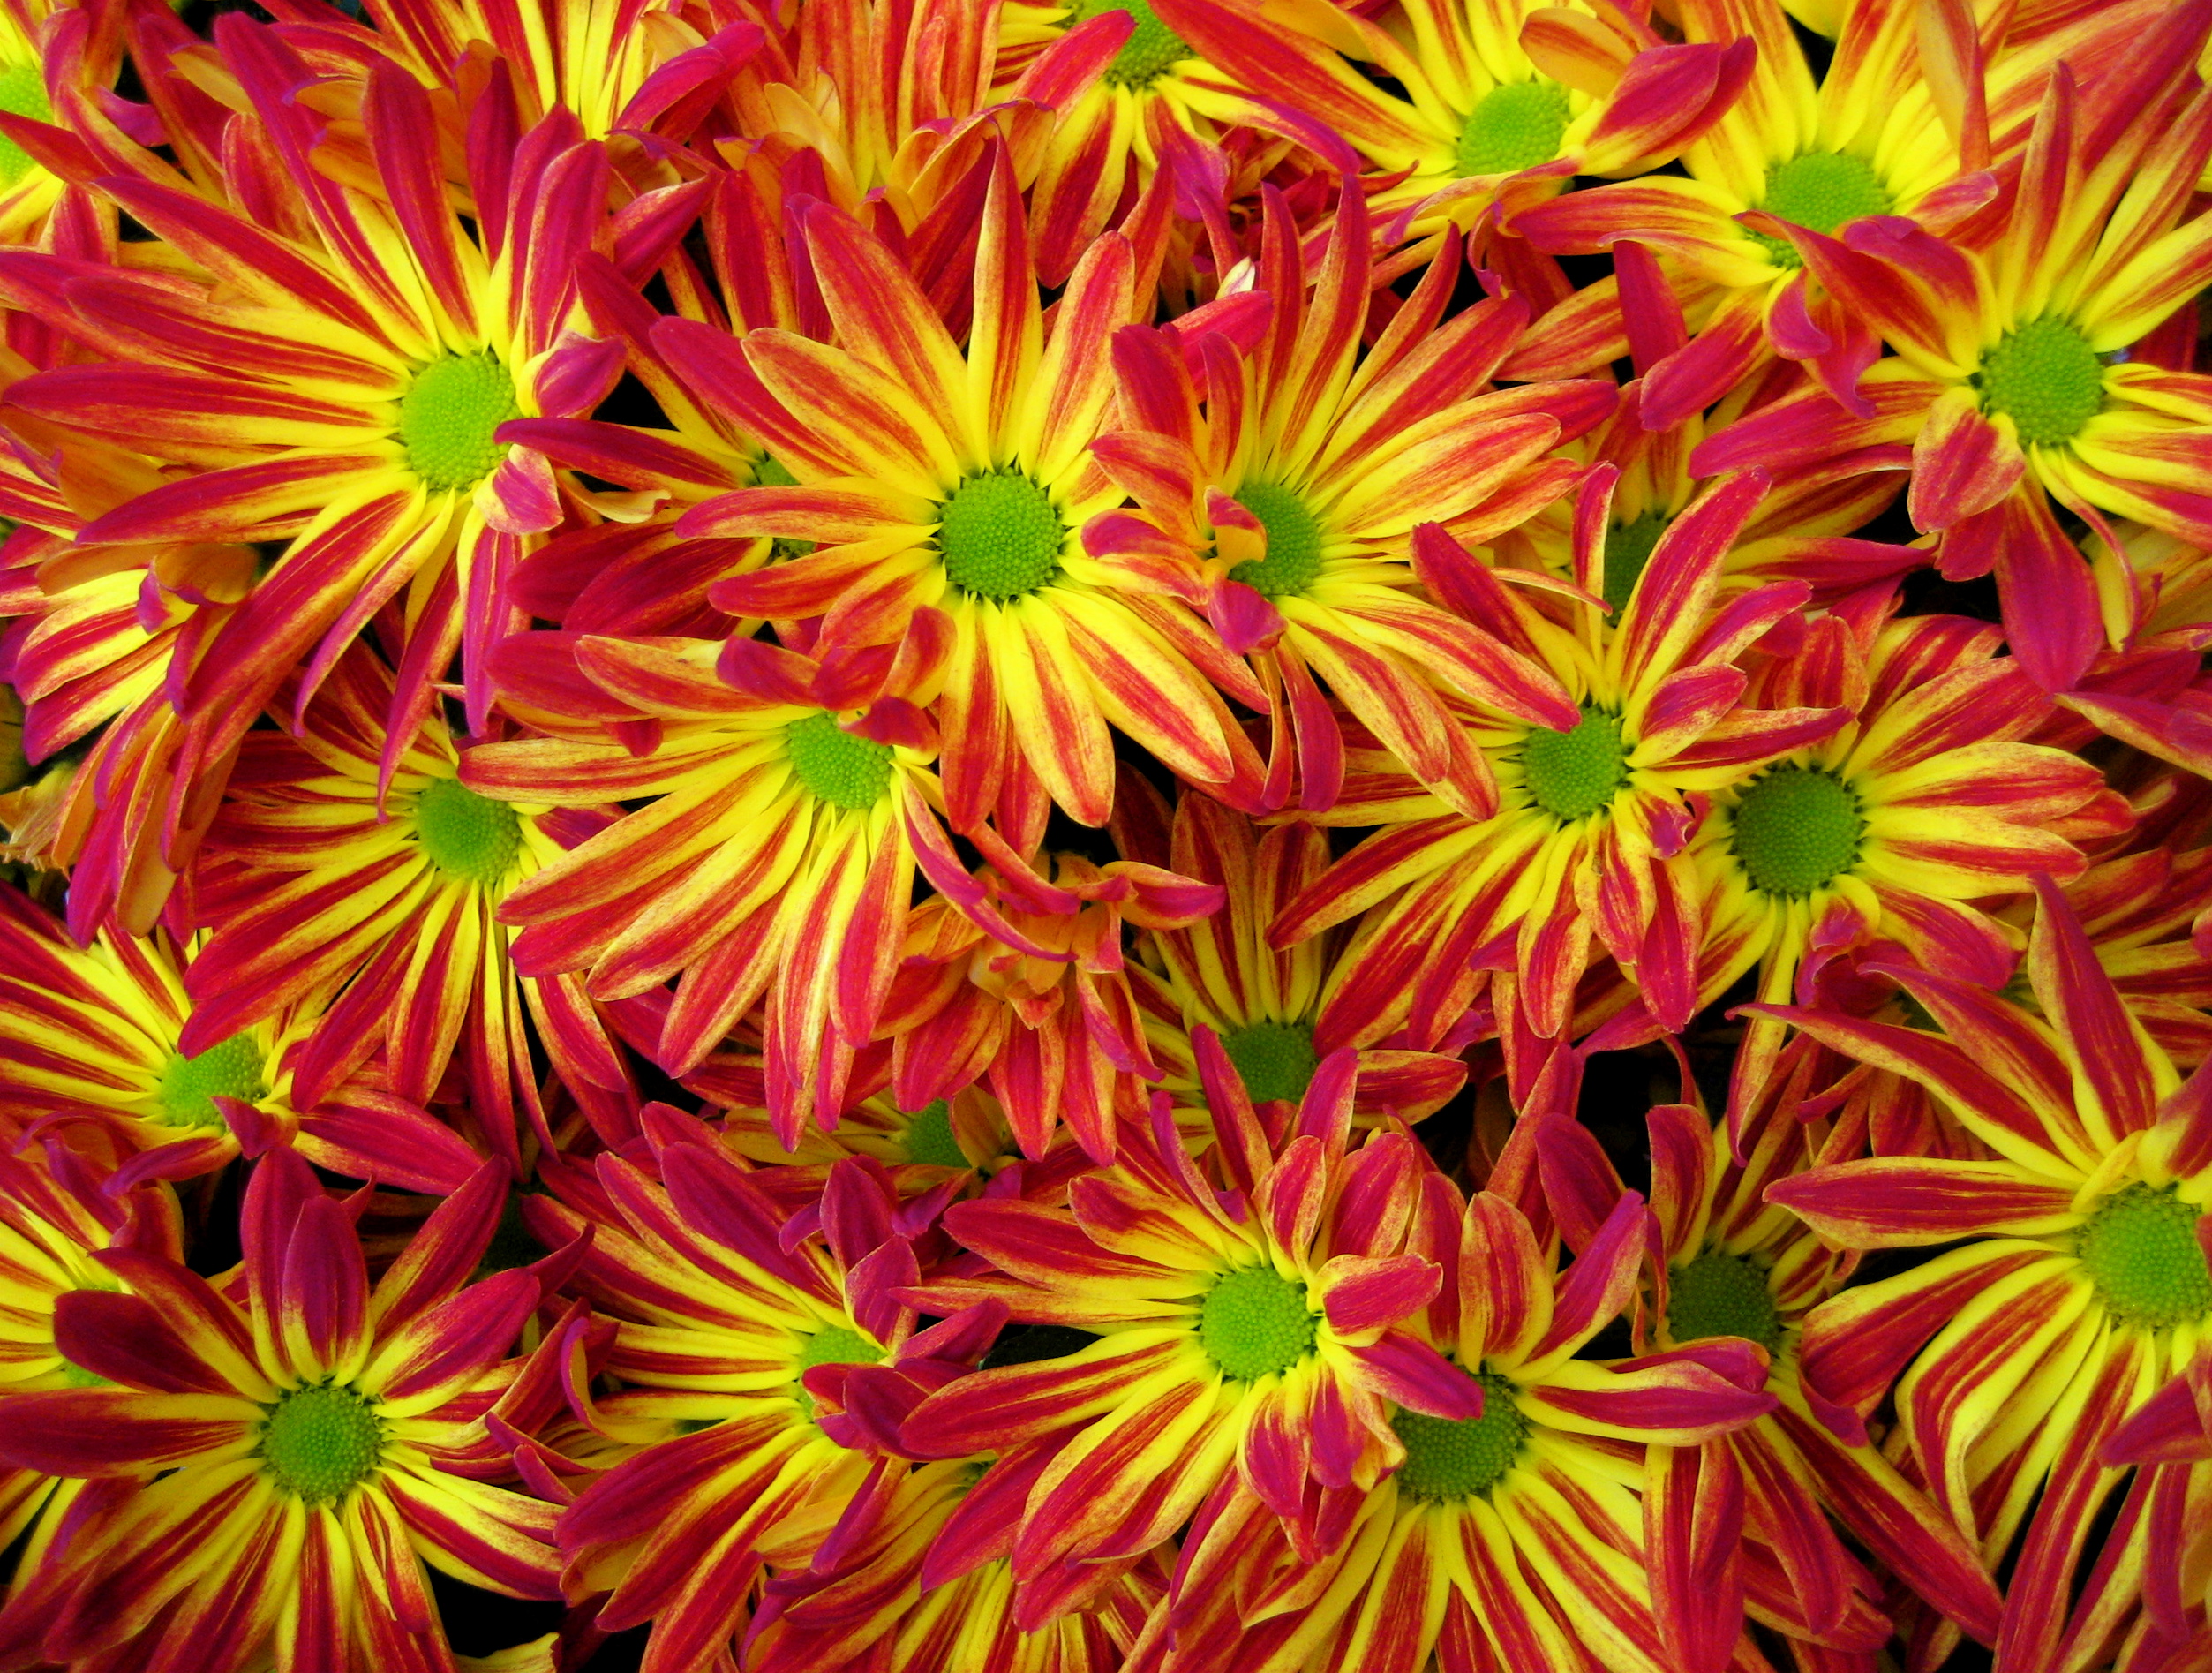 Description Red and yellow Chrysanthemums.jpg